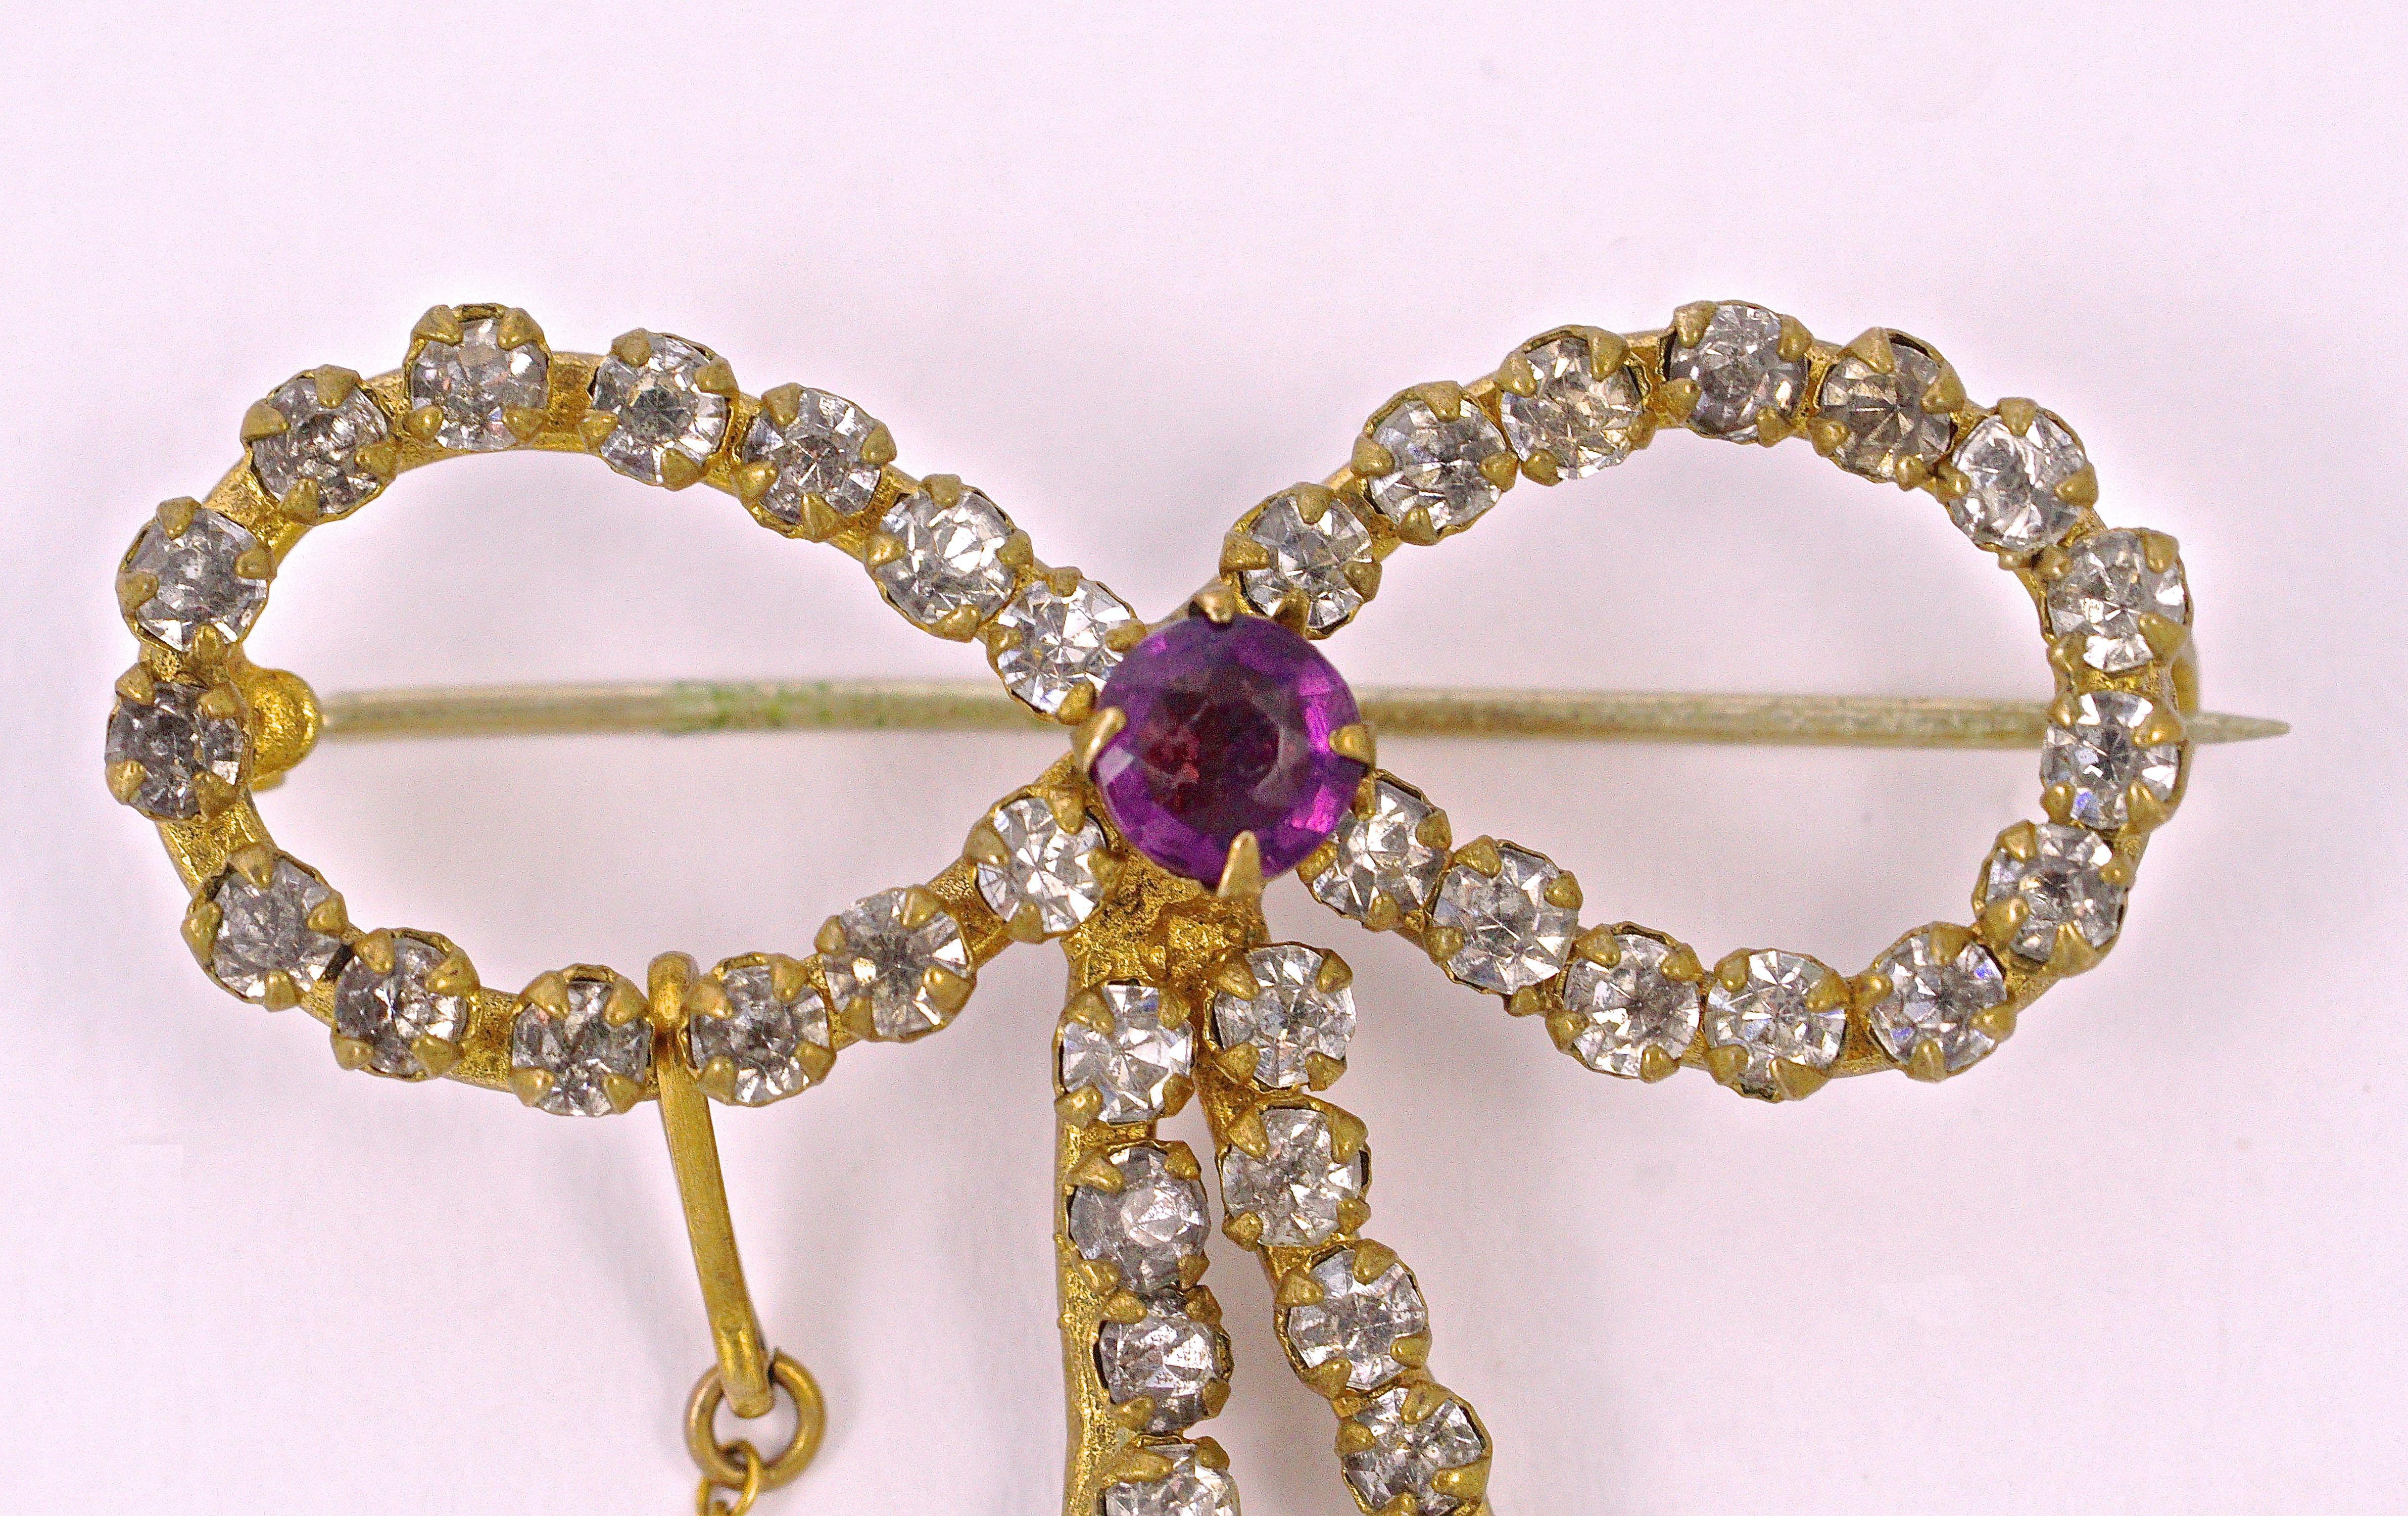 
Exquisite antique gold tone bow brooch set with clear sparkly paste stones, and a centre amethyst paste stone. Measuring length 3.4cm / 1.33 inches by width 2.2cm / .86 inches. The ends of the bow are rose gold tone and are hand engraved. The